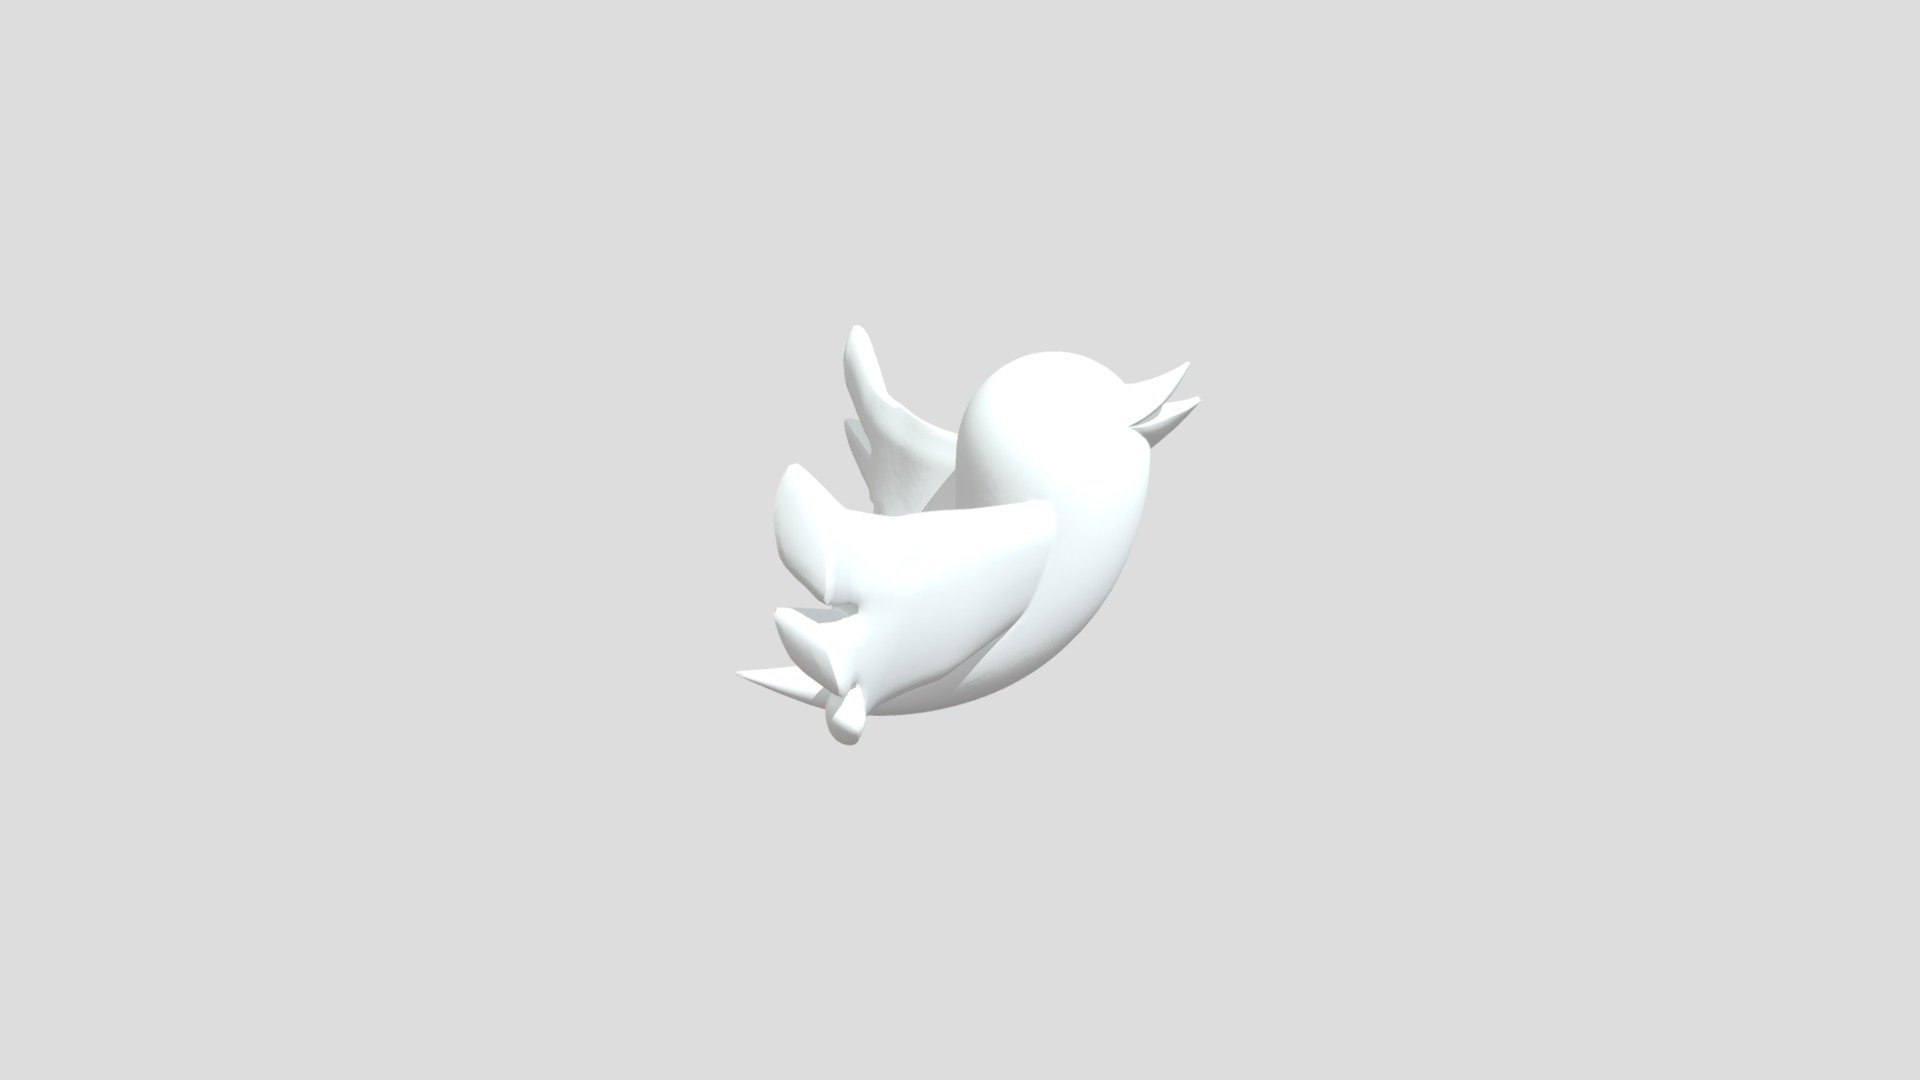 This an amazing fully functional model. Strictly follow the shape of the twitter bird. Contains rigg for wings and beak. There is a slider to control the movement of wings in Cinema 4d 3d model